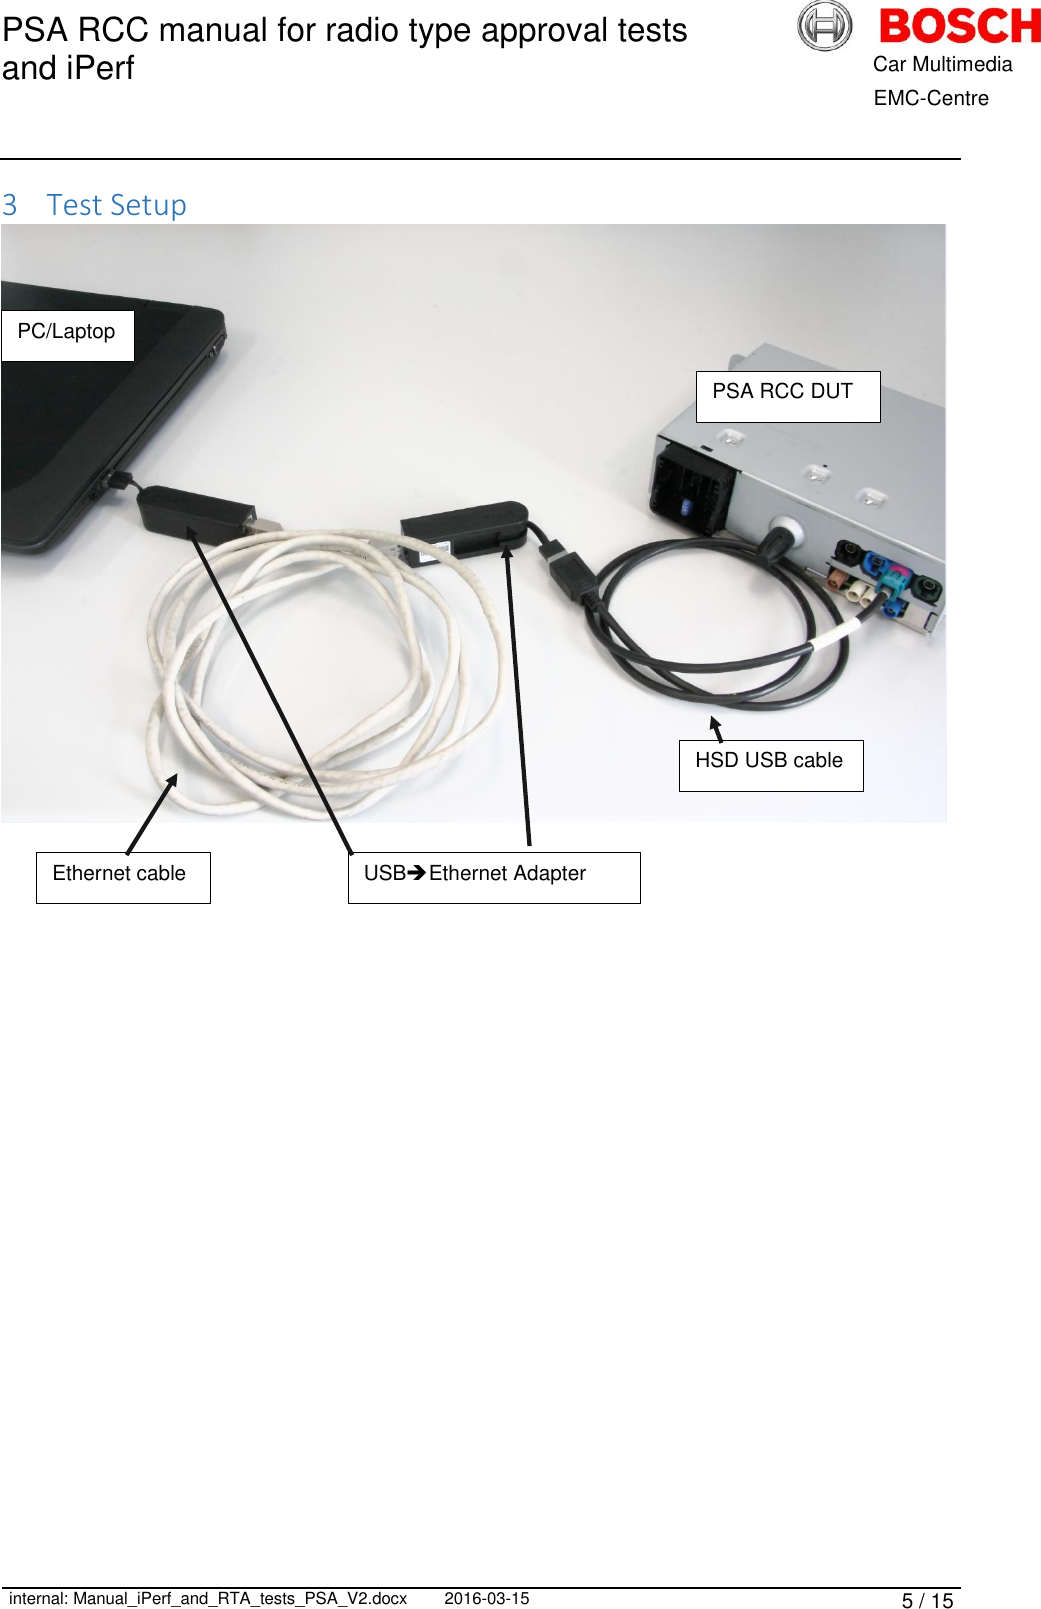 PSA RCC manual for radio type approval tests and iPerf      internal: Manual_iPerf_and_RTA_tests_PSA_V2.docx 2016-03-15 5 / 15            Car Multimedia       EMC-Centre 3 Test Setup             PC/Laptop USBEthernet Adapter Ethernet cable HSD USB cable PSA RCC DUT 